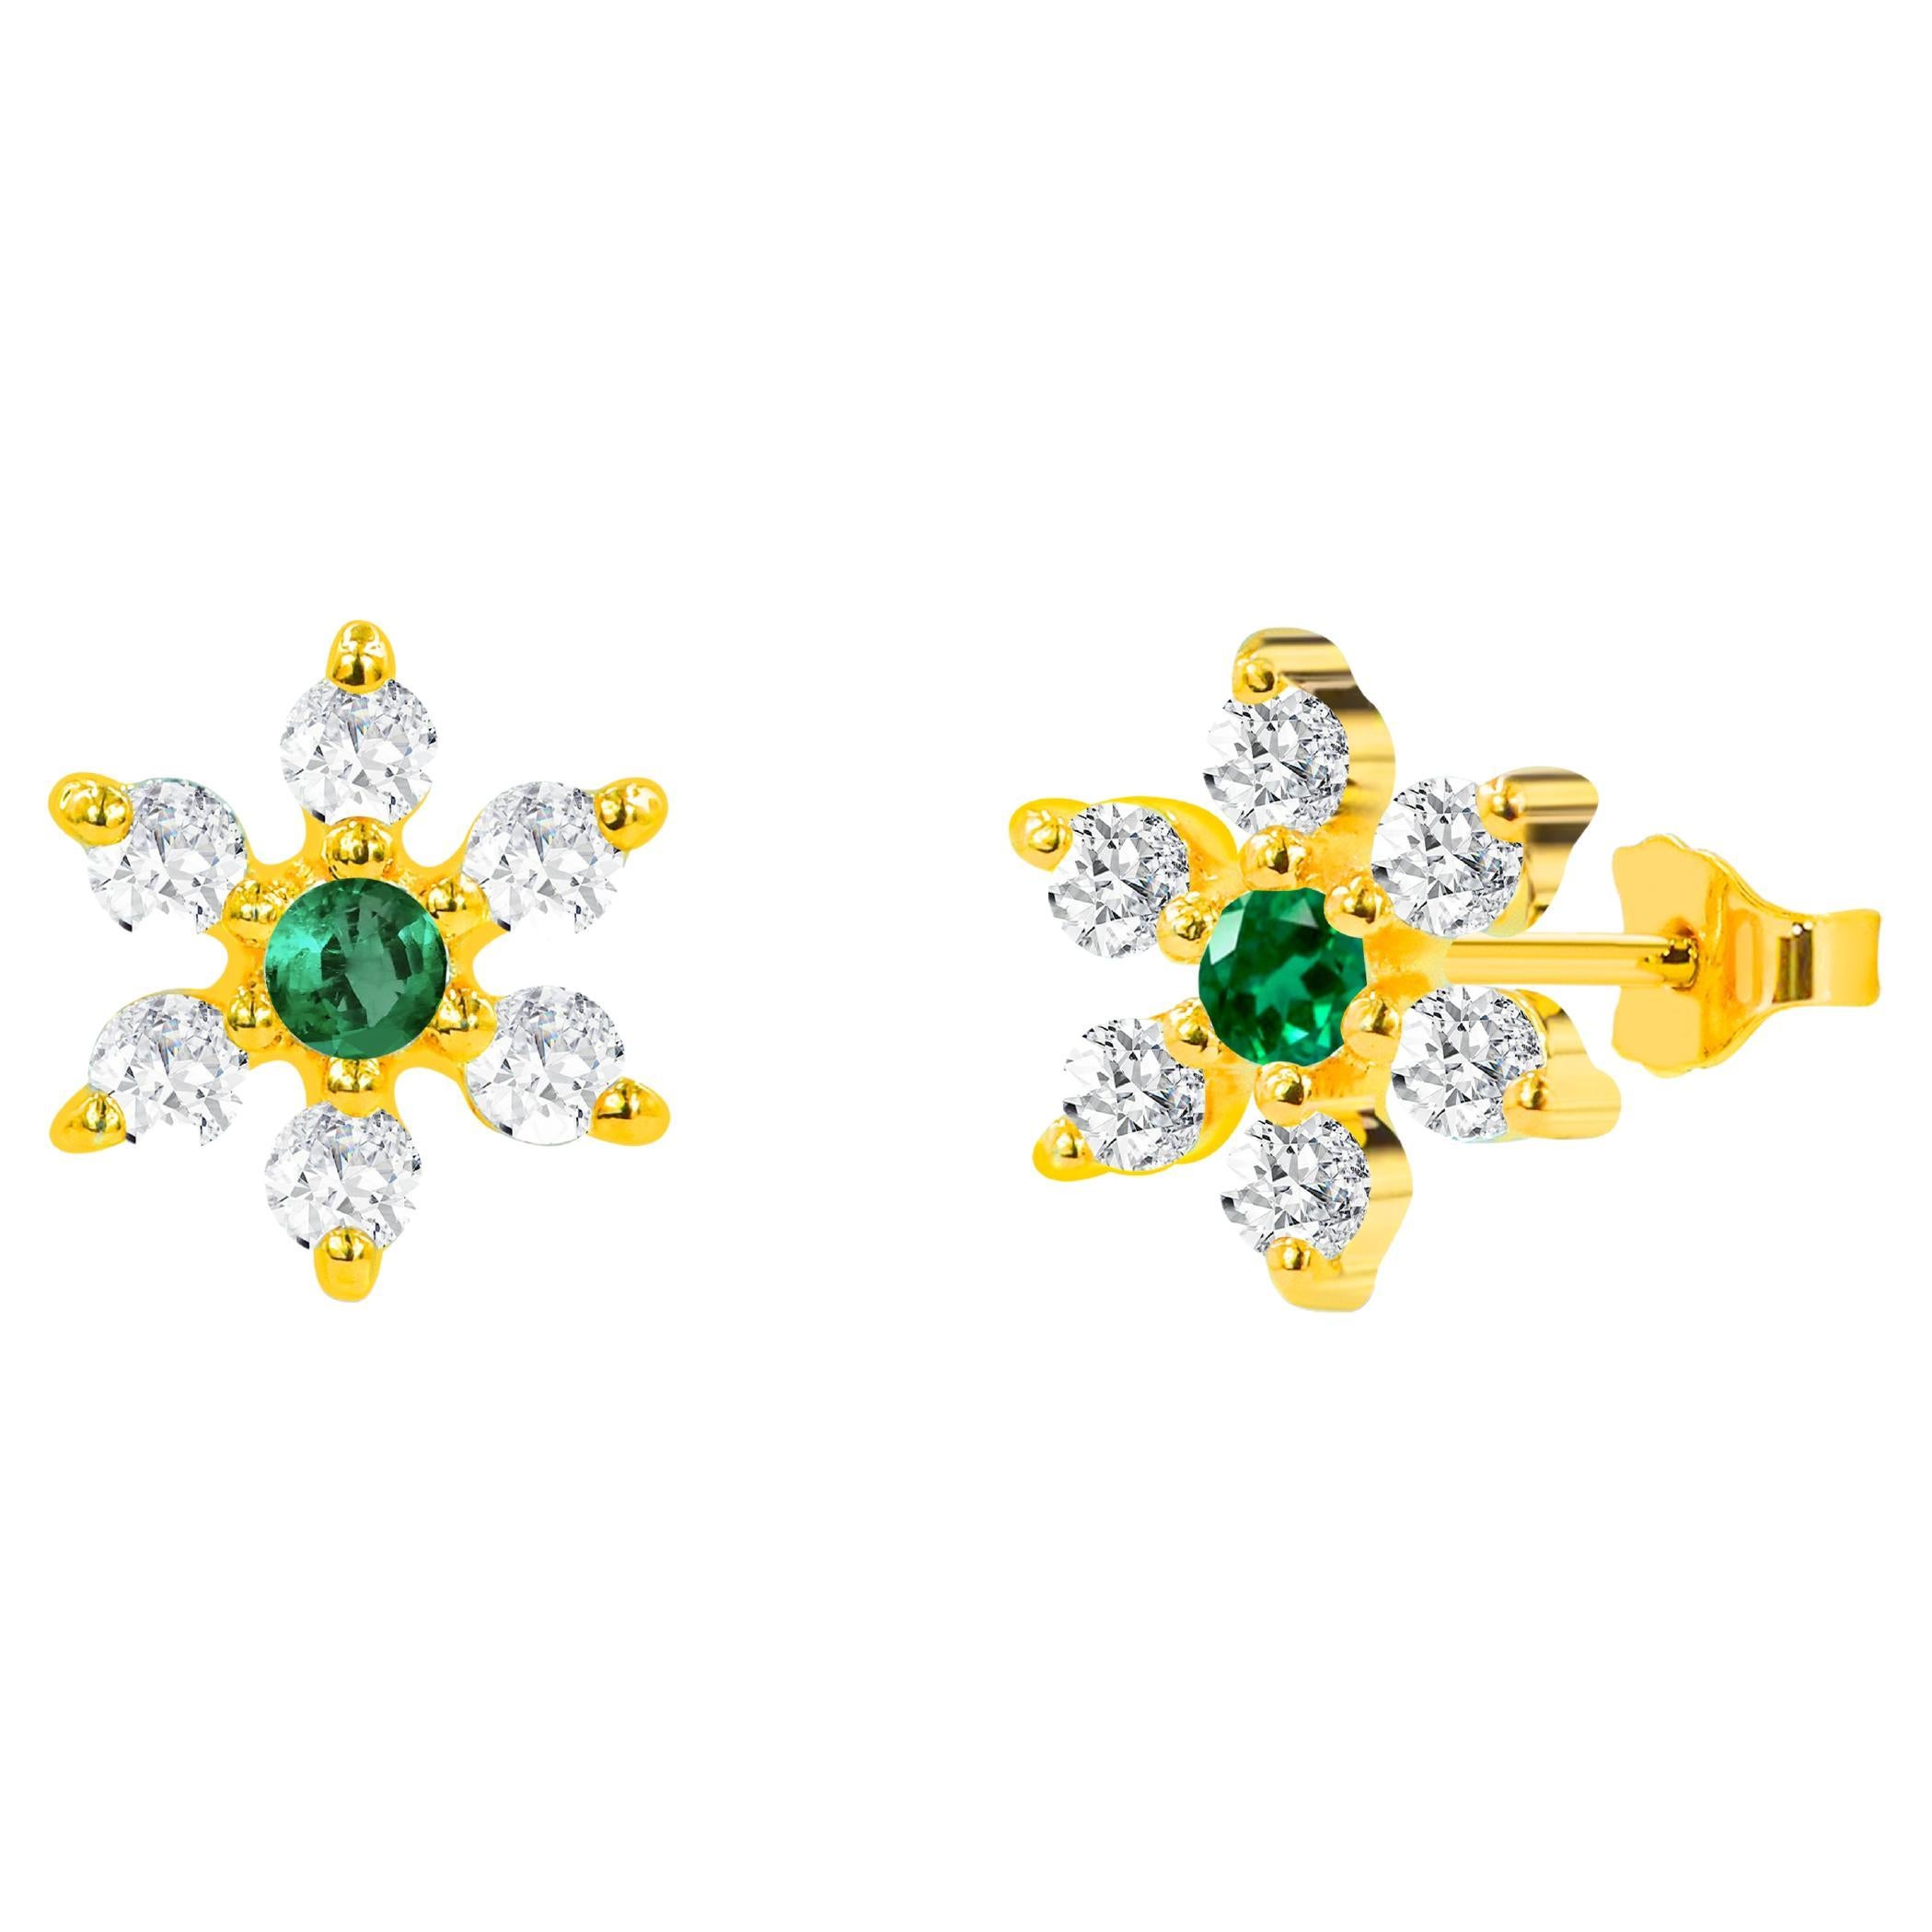 0.34ct Ruby, Emerald and Sapphire Flower Studs with Diamonds in 14k Gold